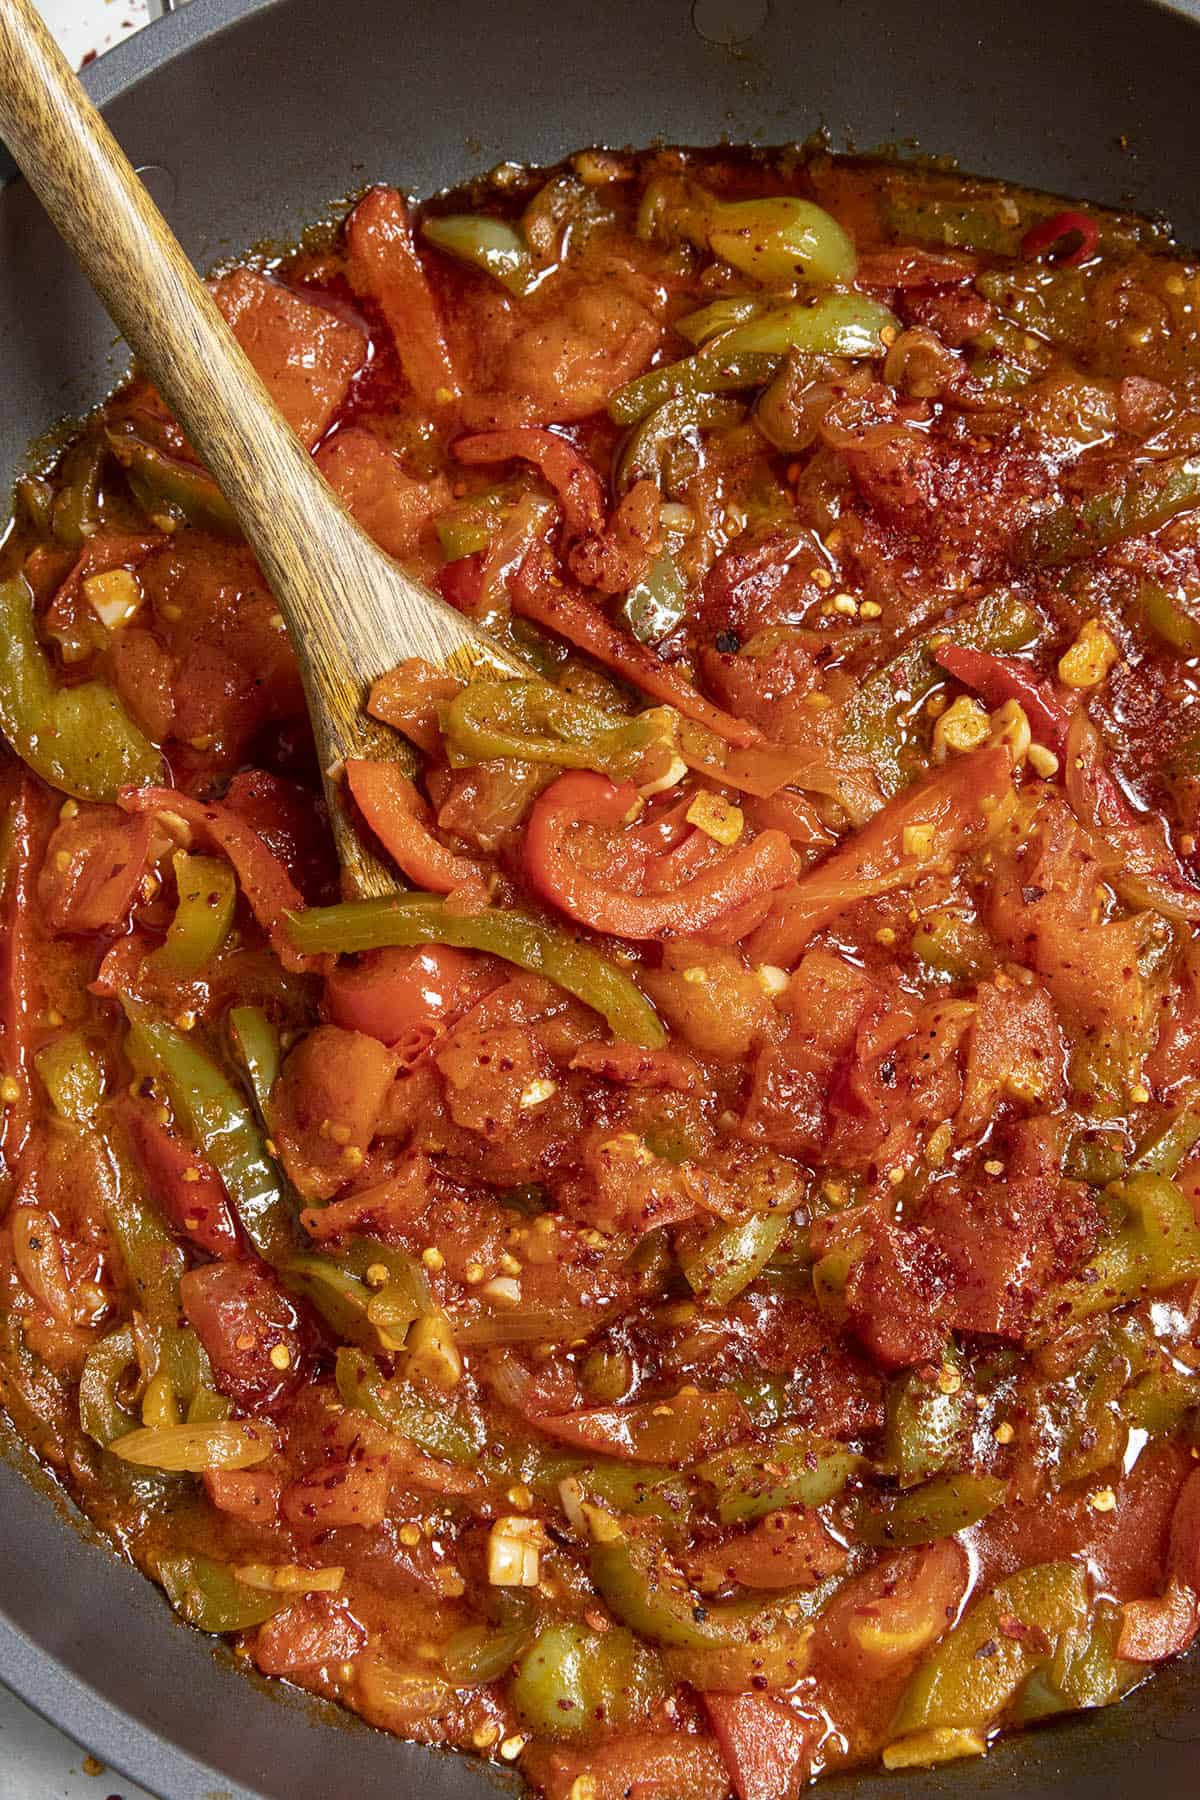 Spicy Piperade in a hot pan, ready to serve